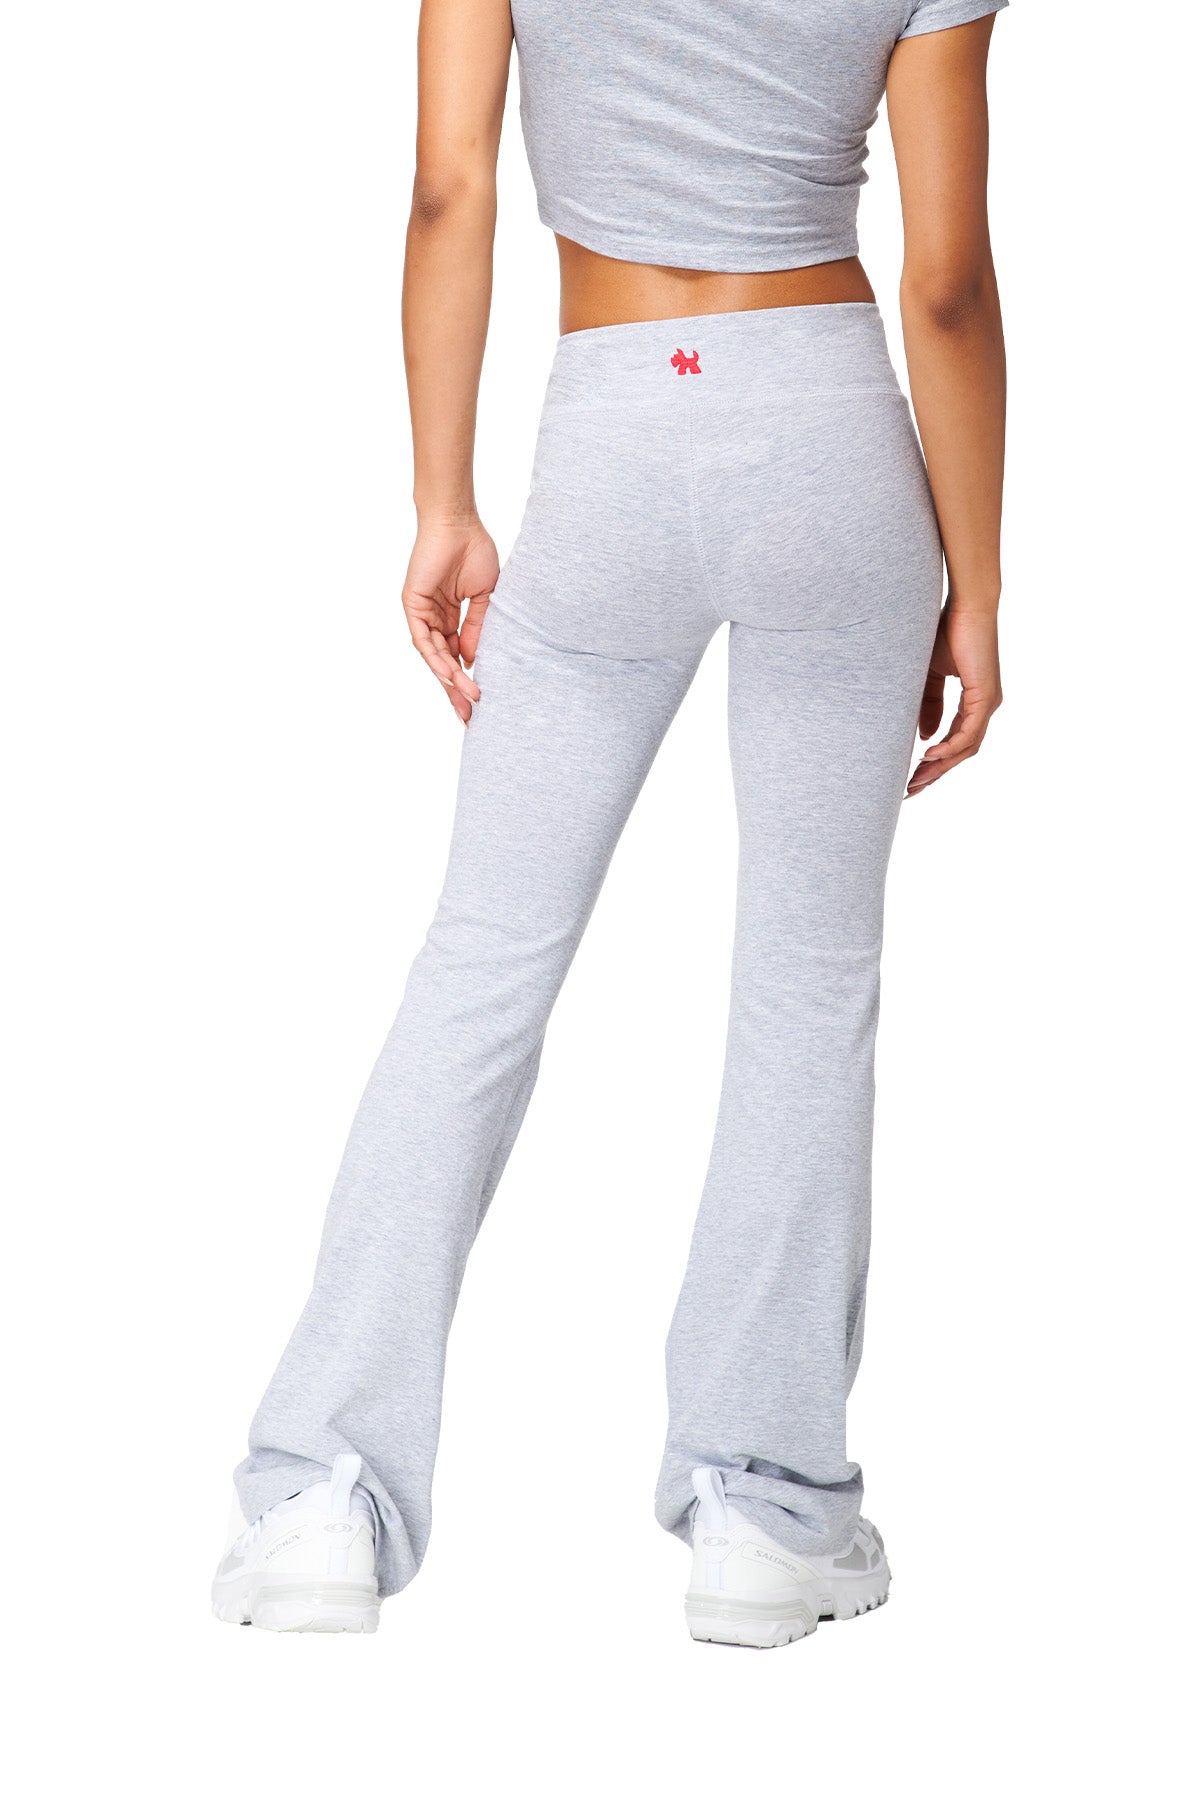 Tiana - Flared Pant with 3